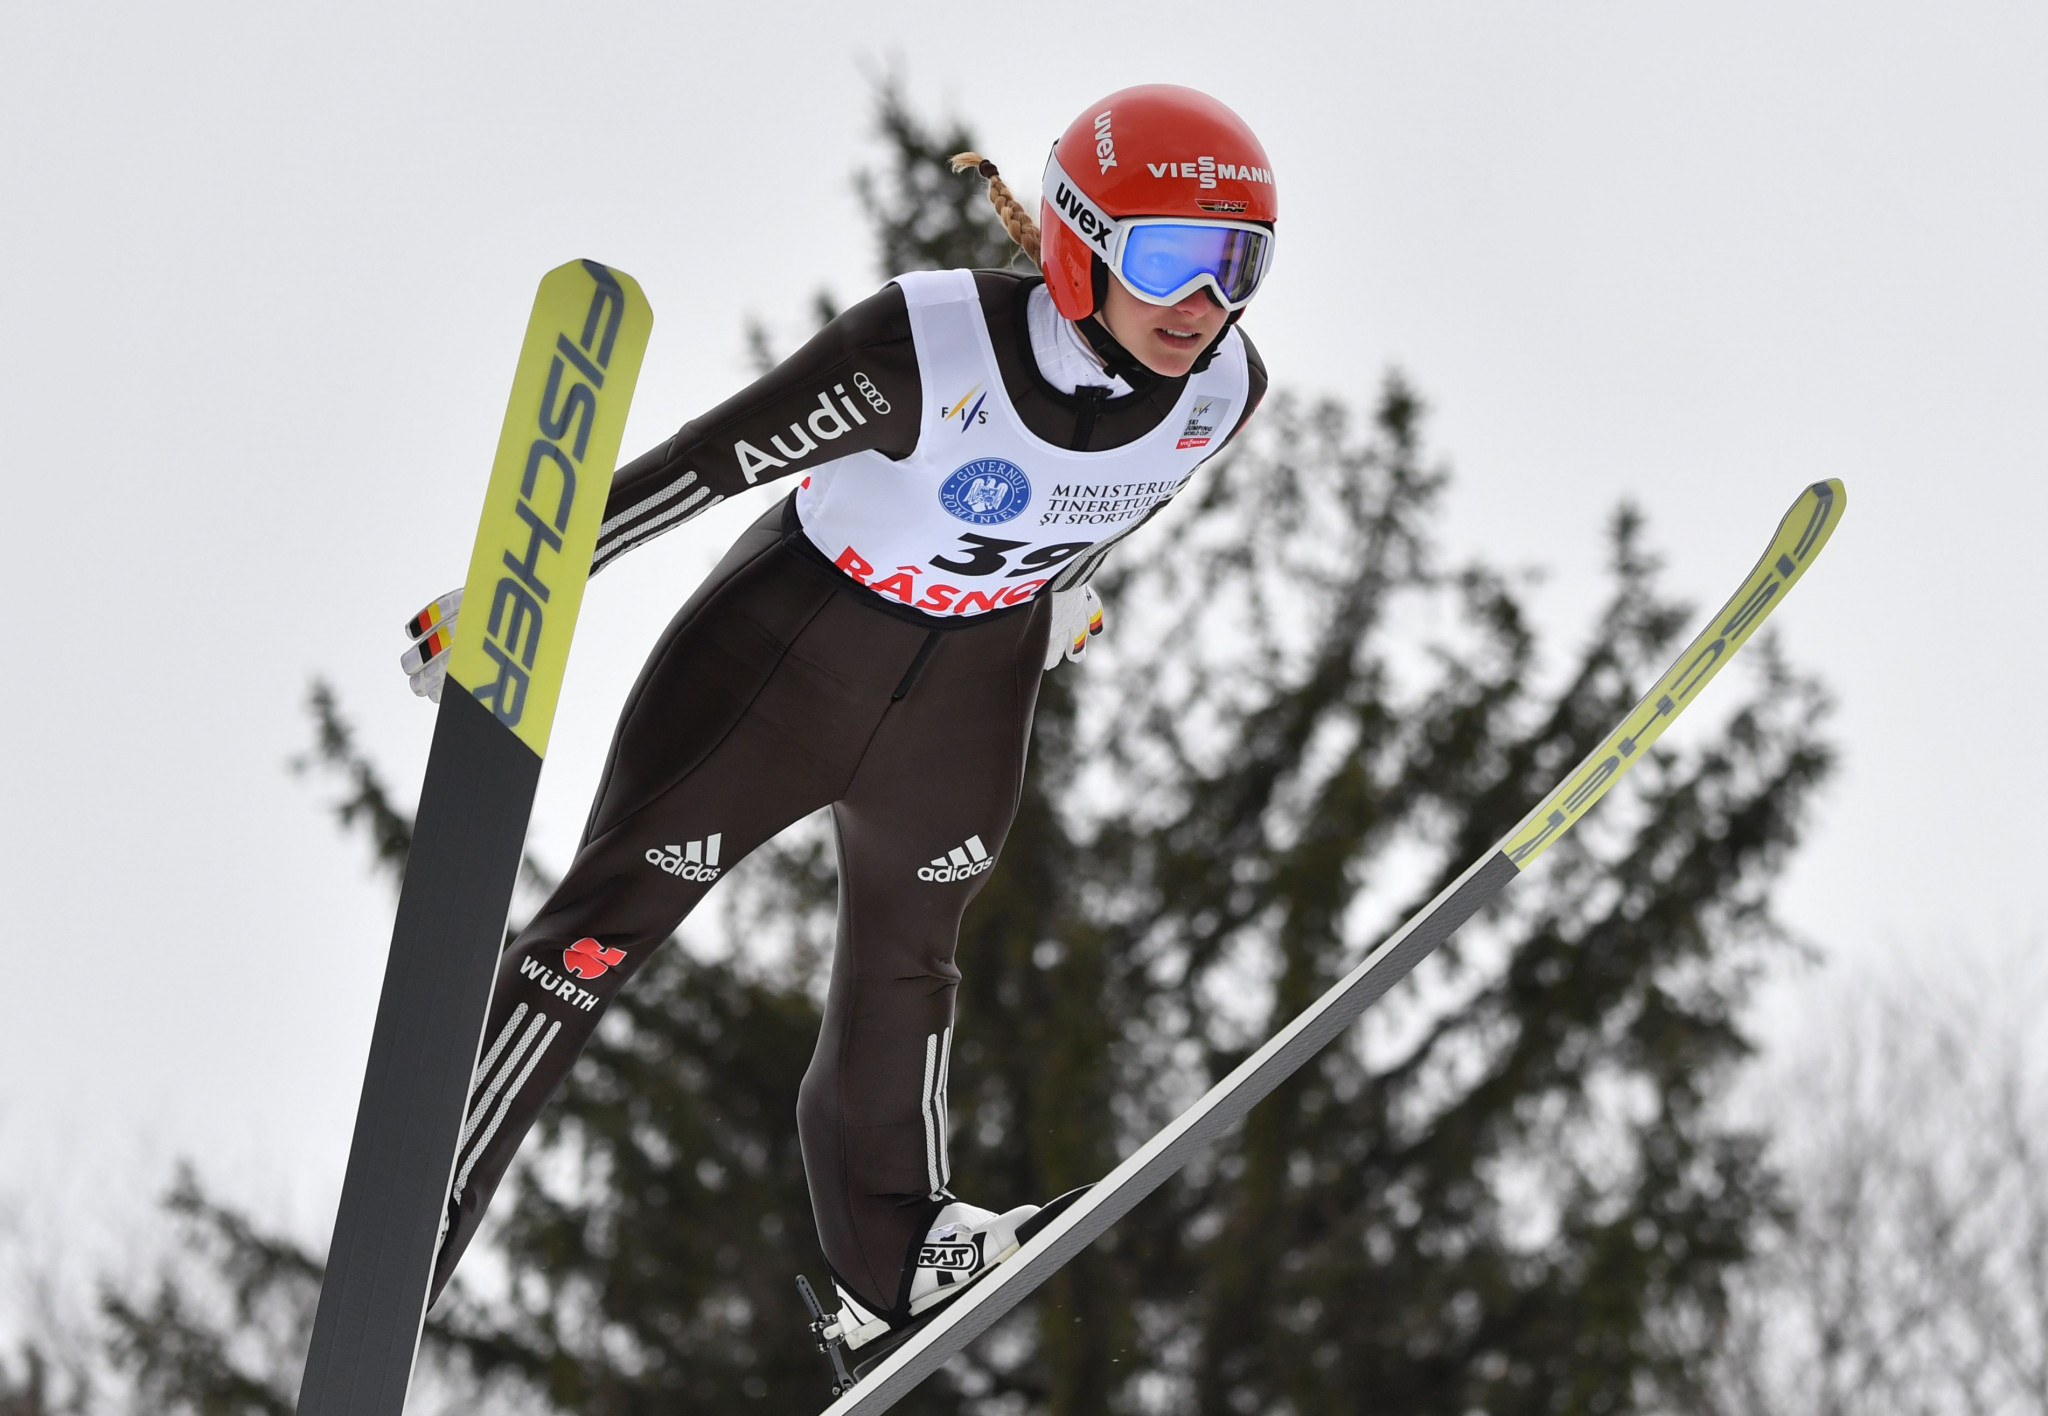 Germany's Katharina Althaus sealed her third win of the season ©Getty Images